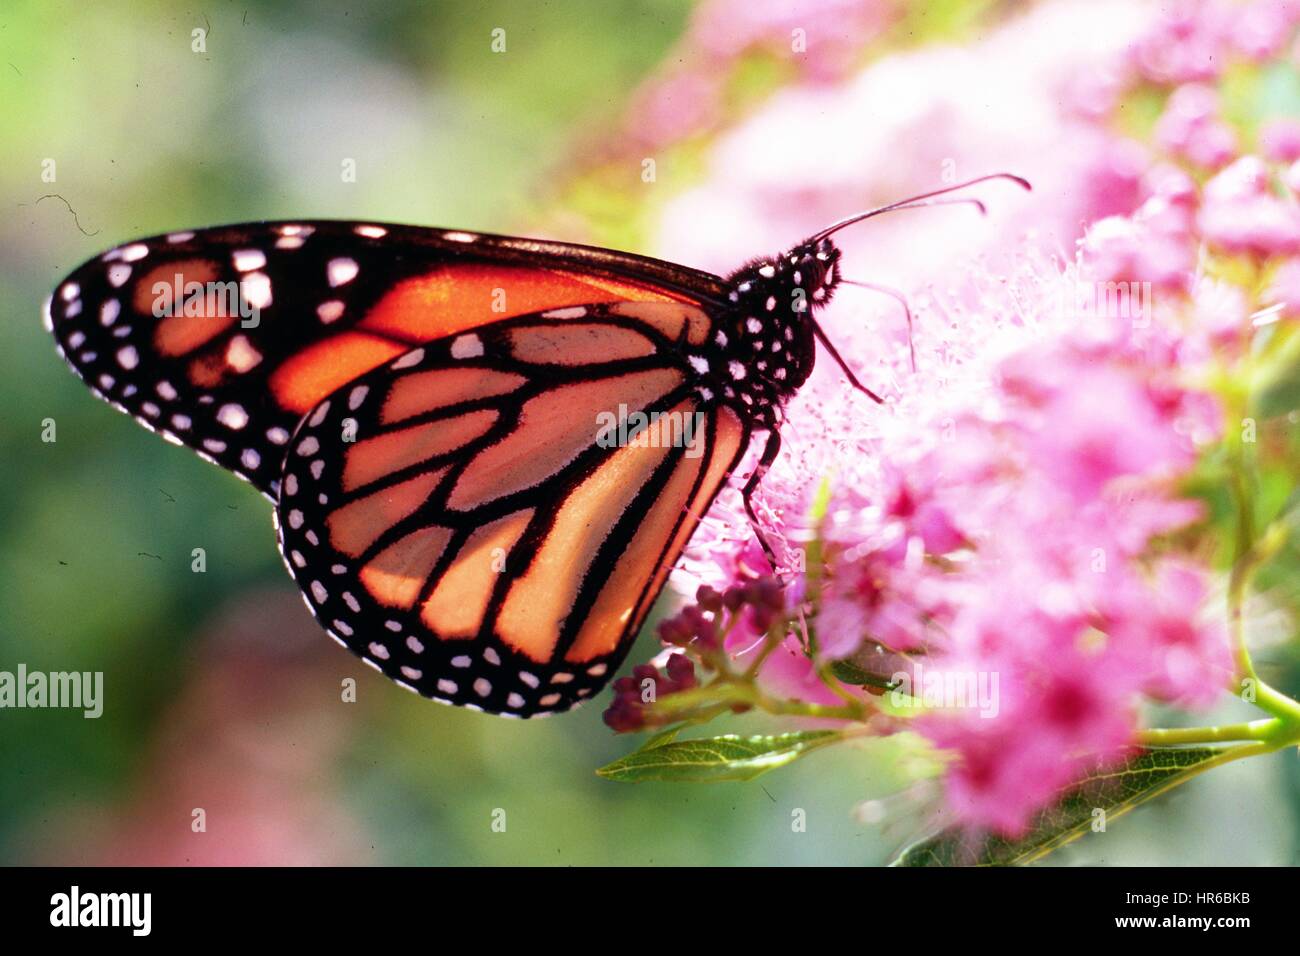 A Monarch Butterfly Collects Nectar From A Flower In The People S